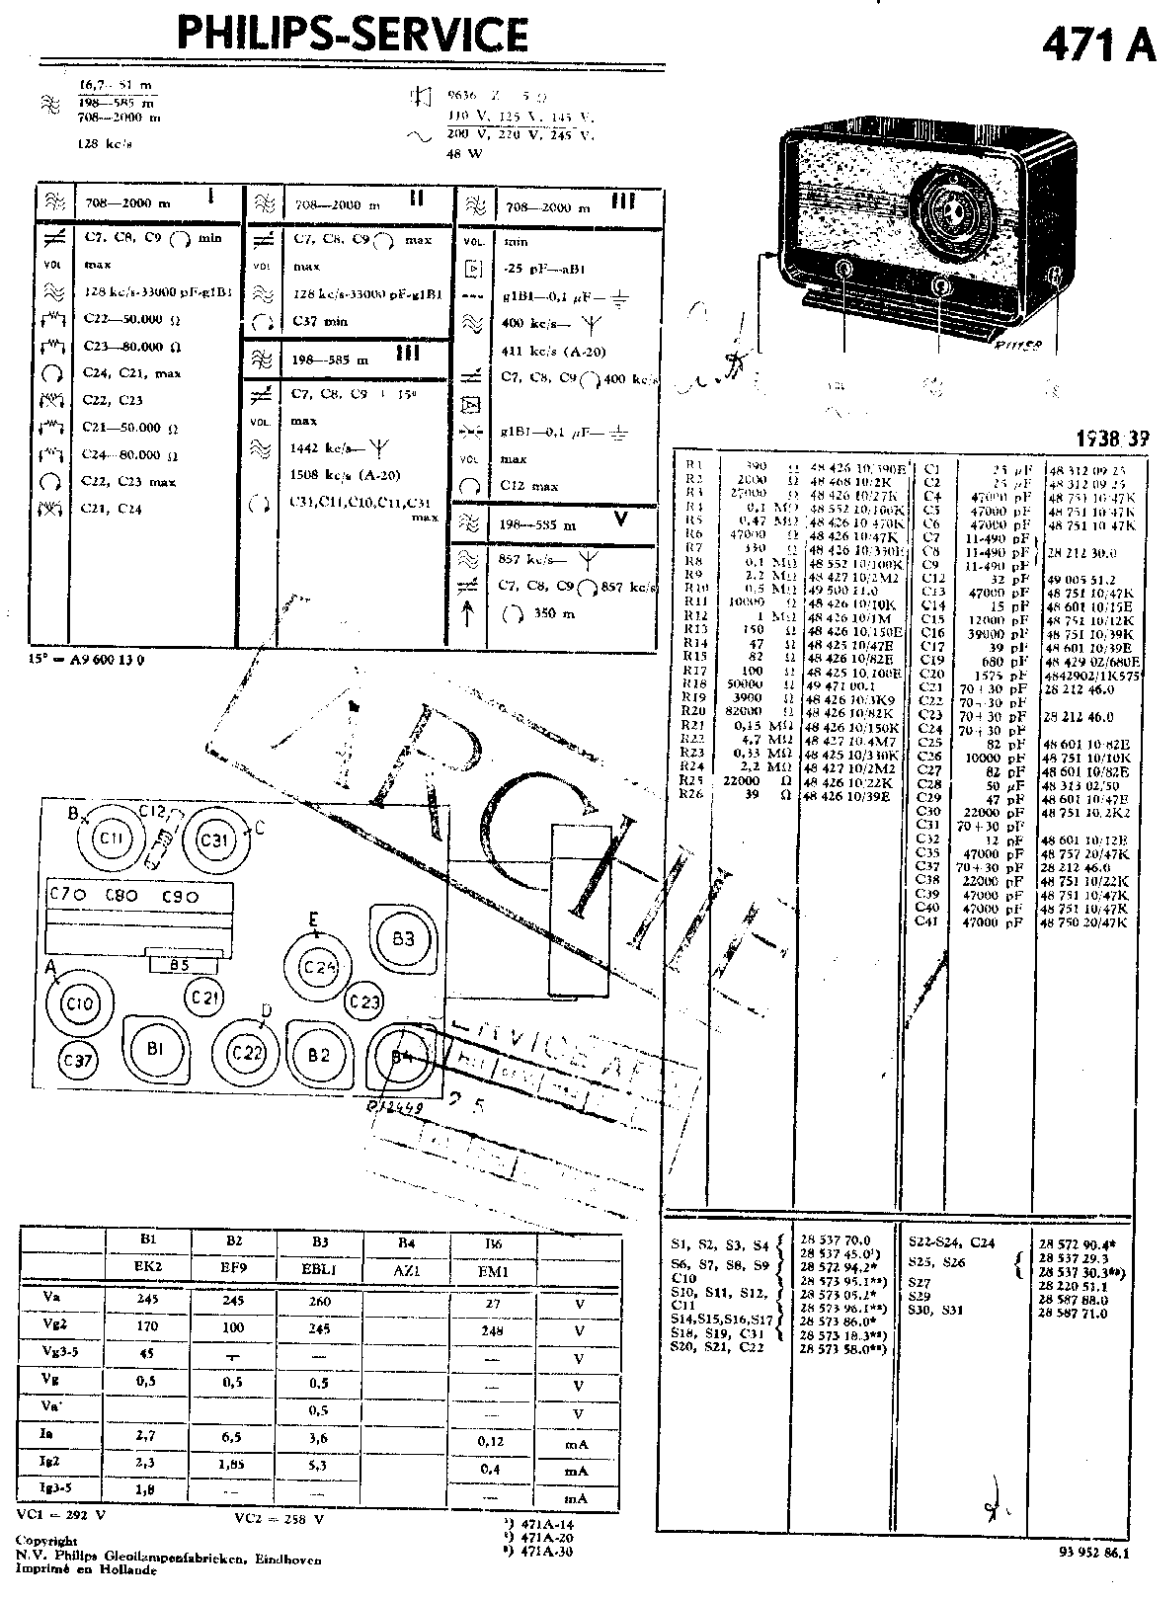 Philips 471-A Service Manual